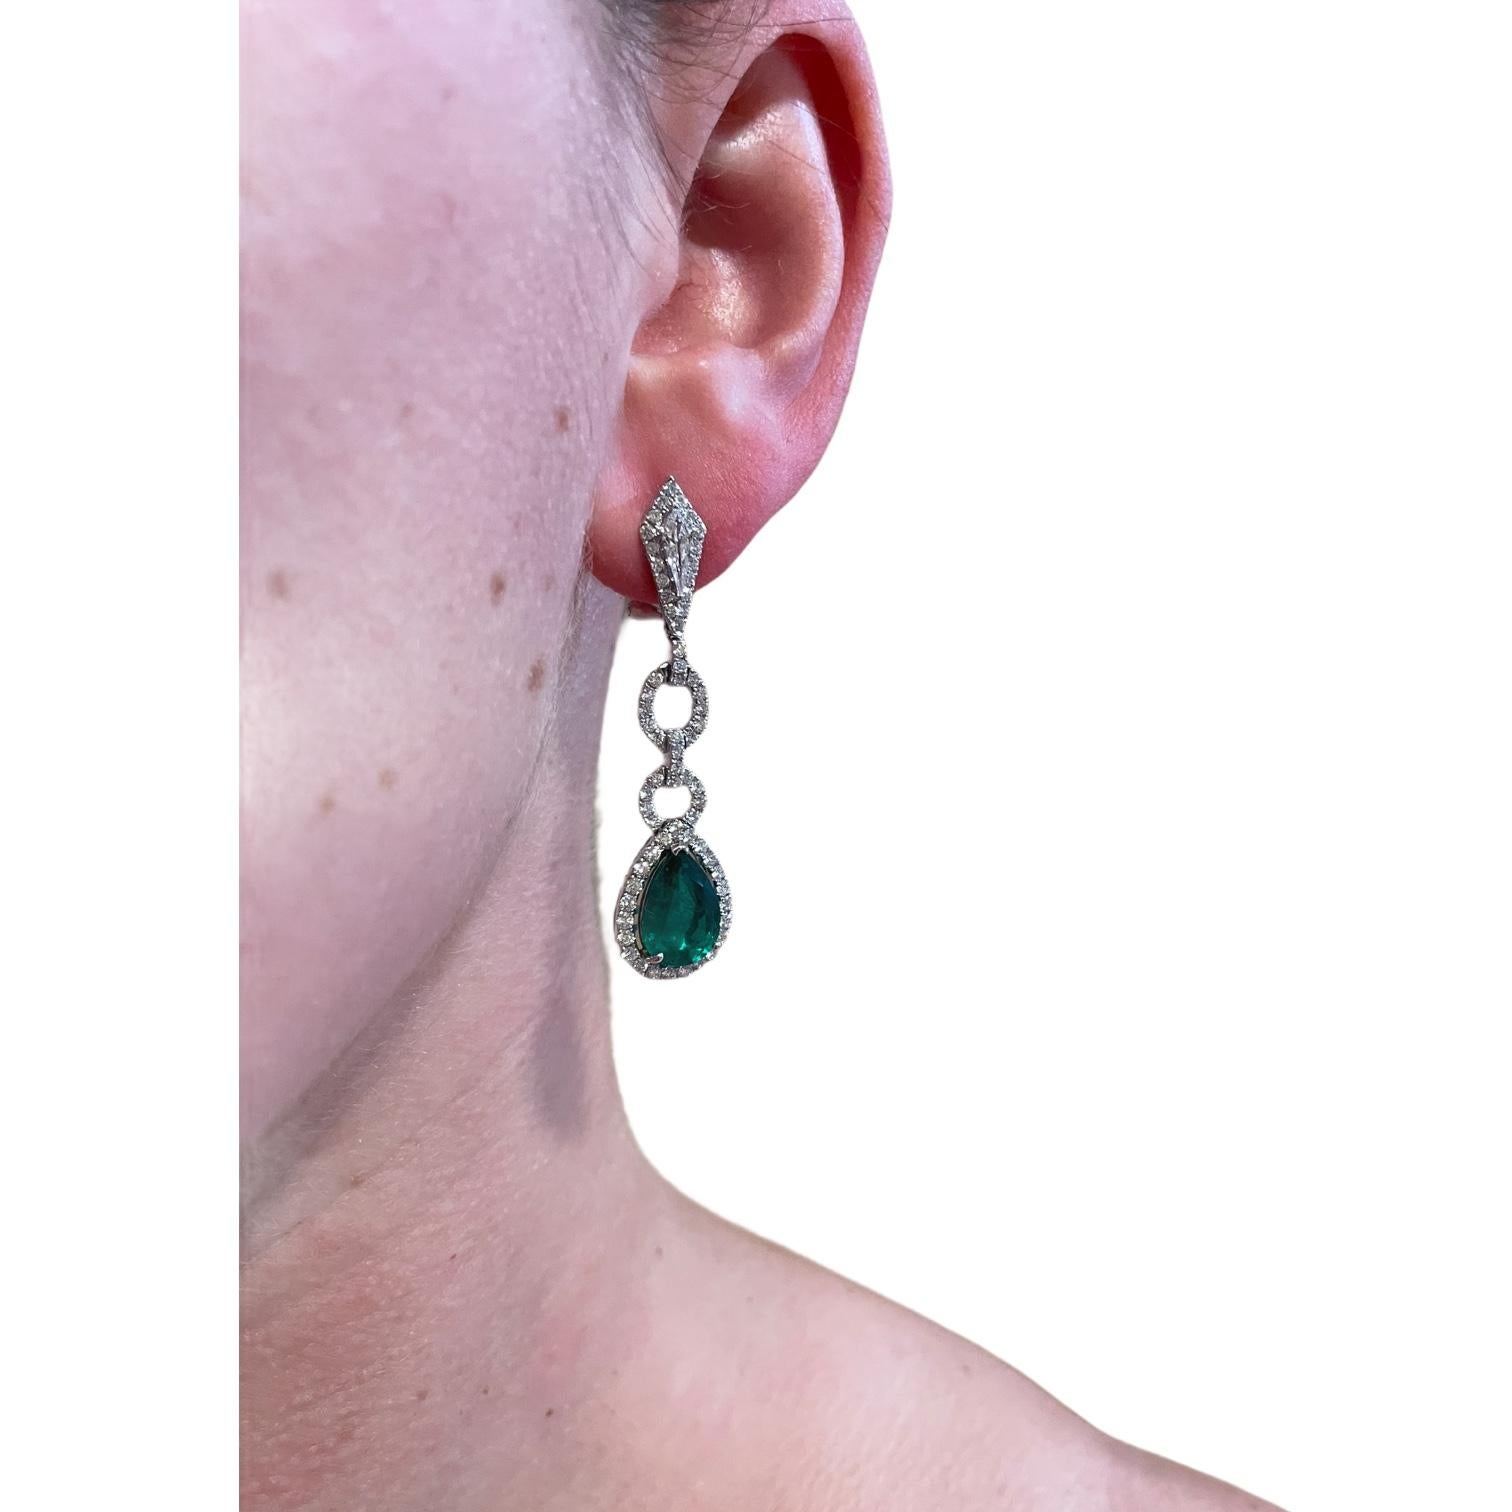 Glamorous emerald and diamond drop earrings in 18k white gold. Earrings contain 2 fine pear shape emerald drops 5.11tcw, surrounded by 134 round brilliant diamonds & 2 kite shape diamonds, 2.35tcw. Diamonds are near colorless and VS in clarity.